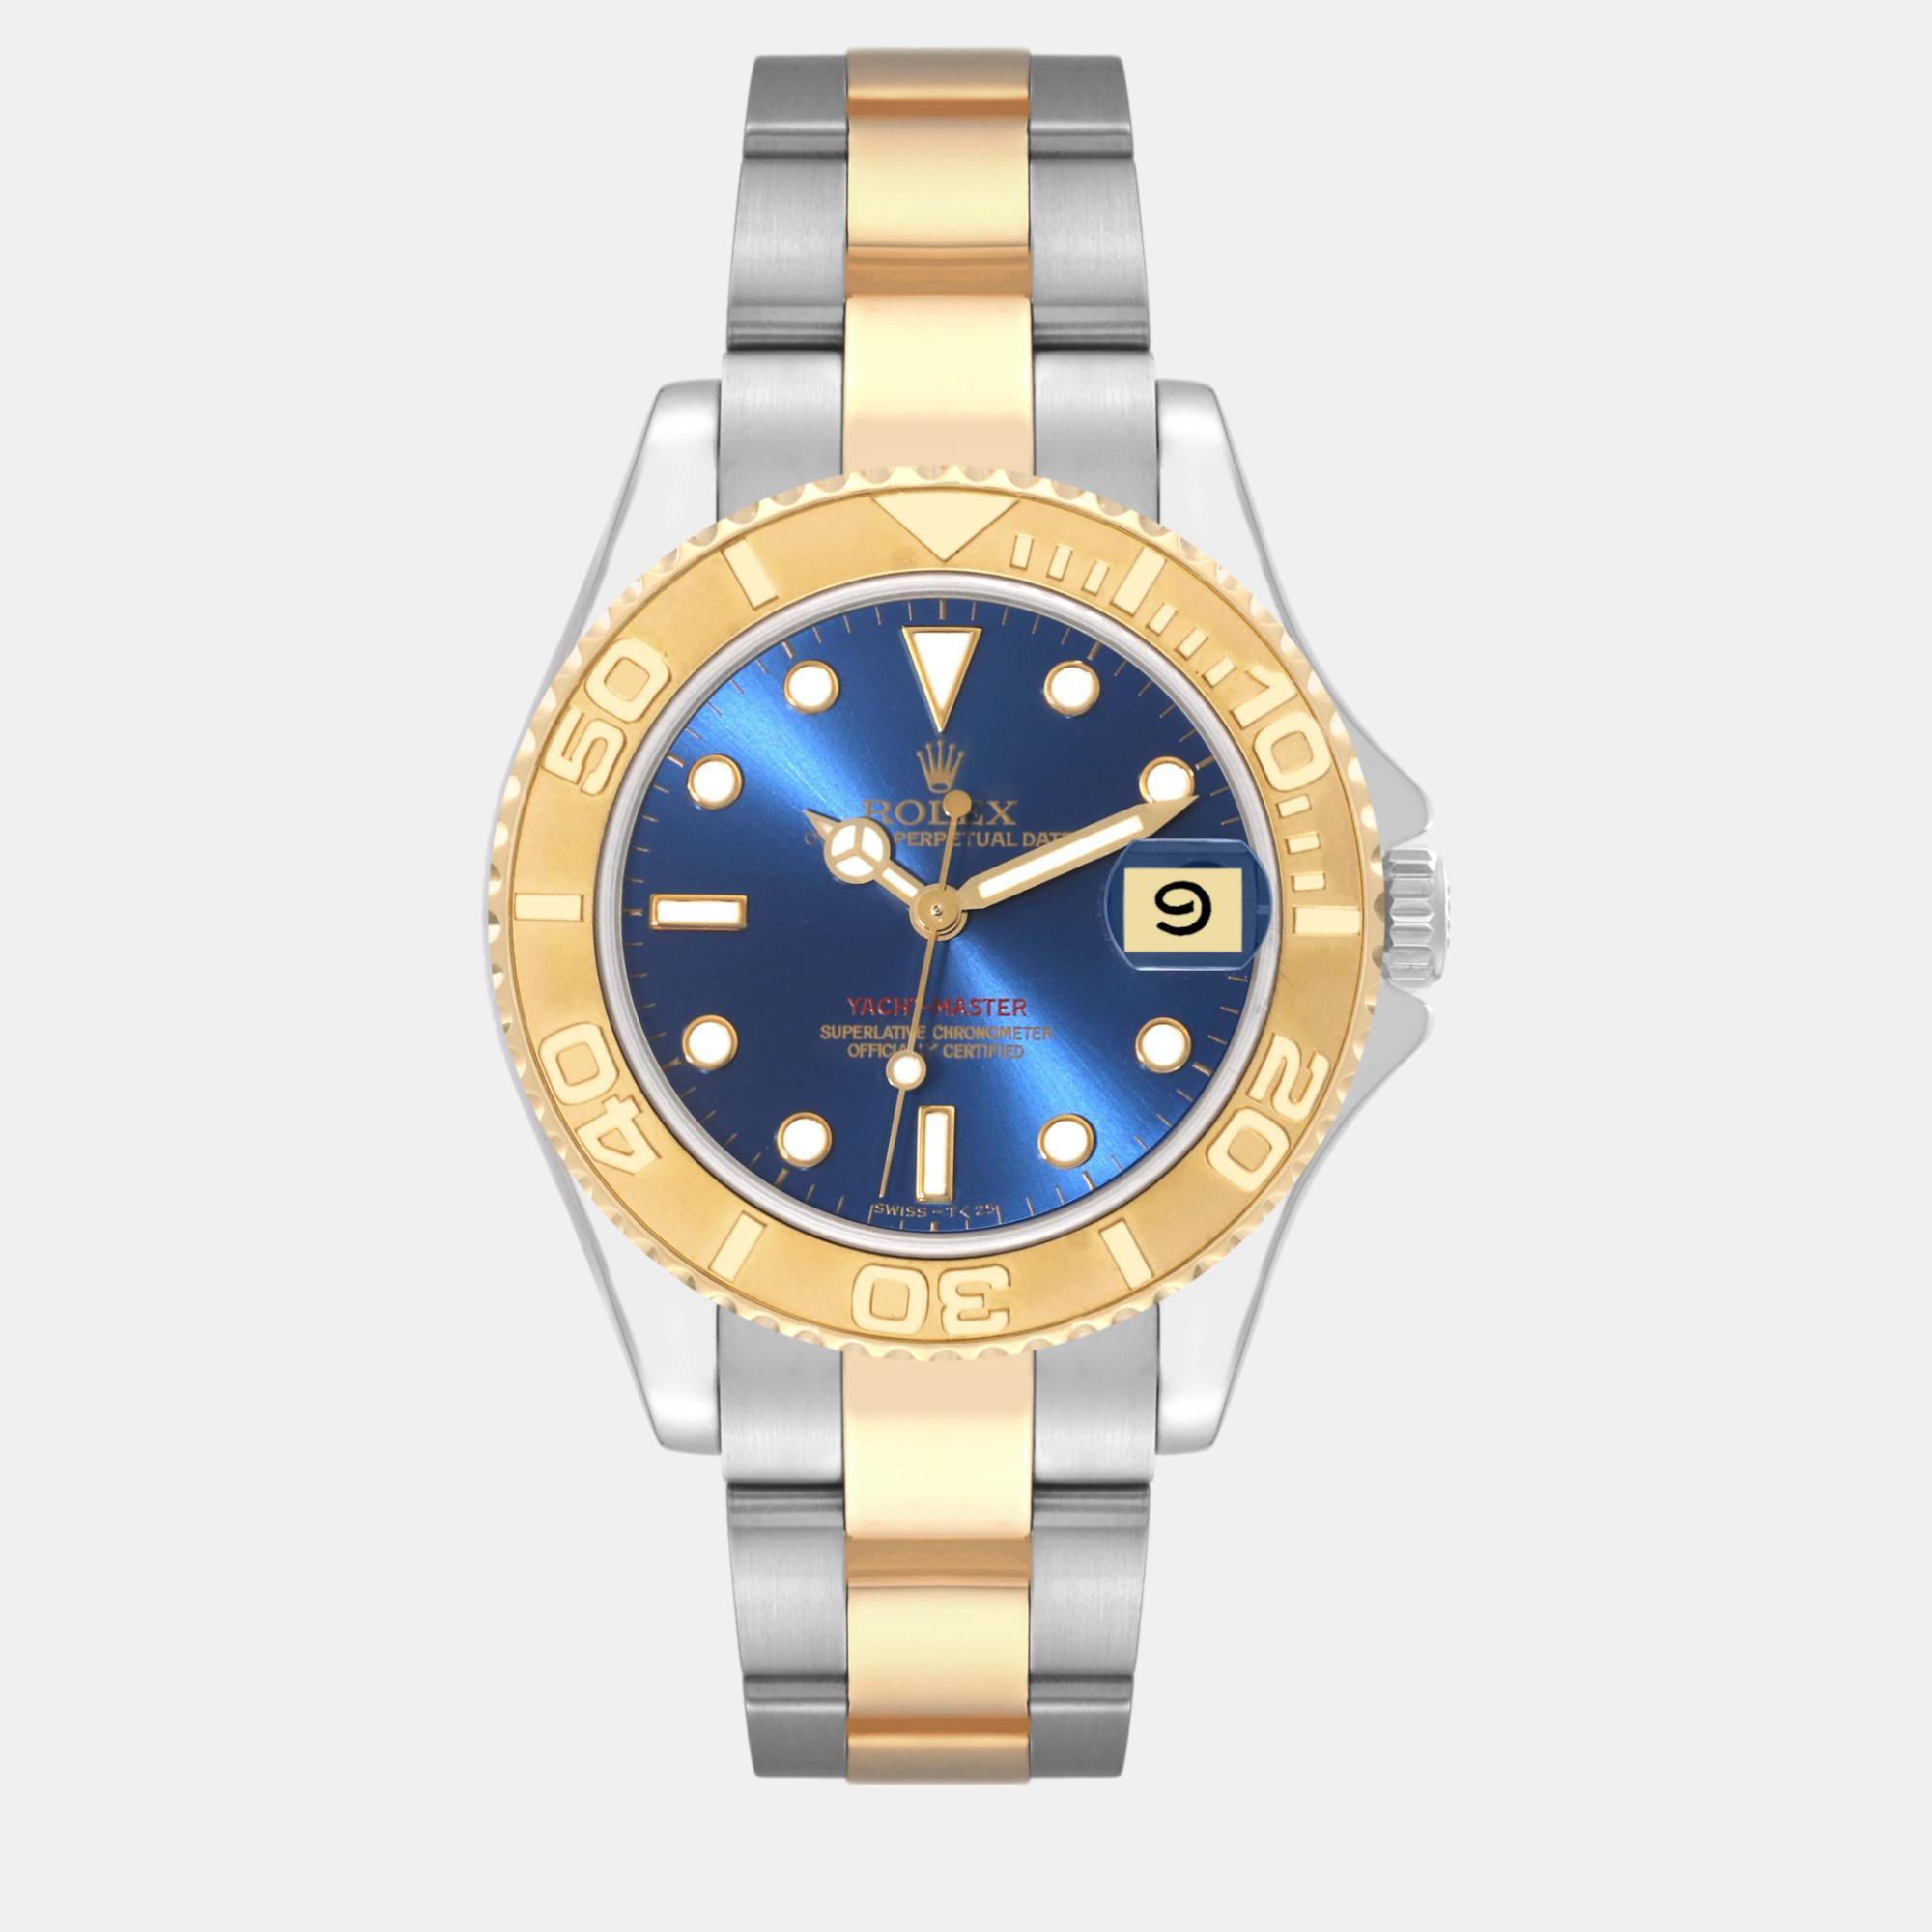 Rolex yachtmaster midsize blue dial steel yellow gold men's watch 68623 35 mm